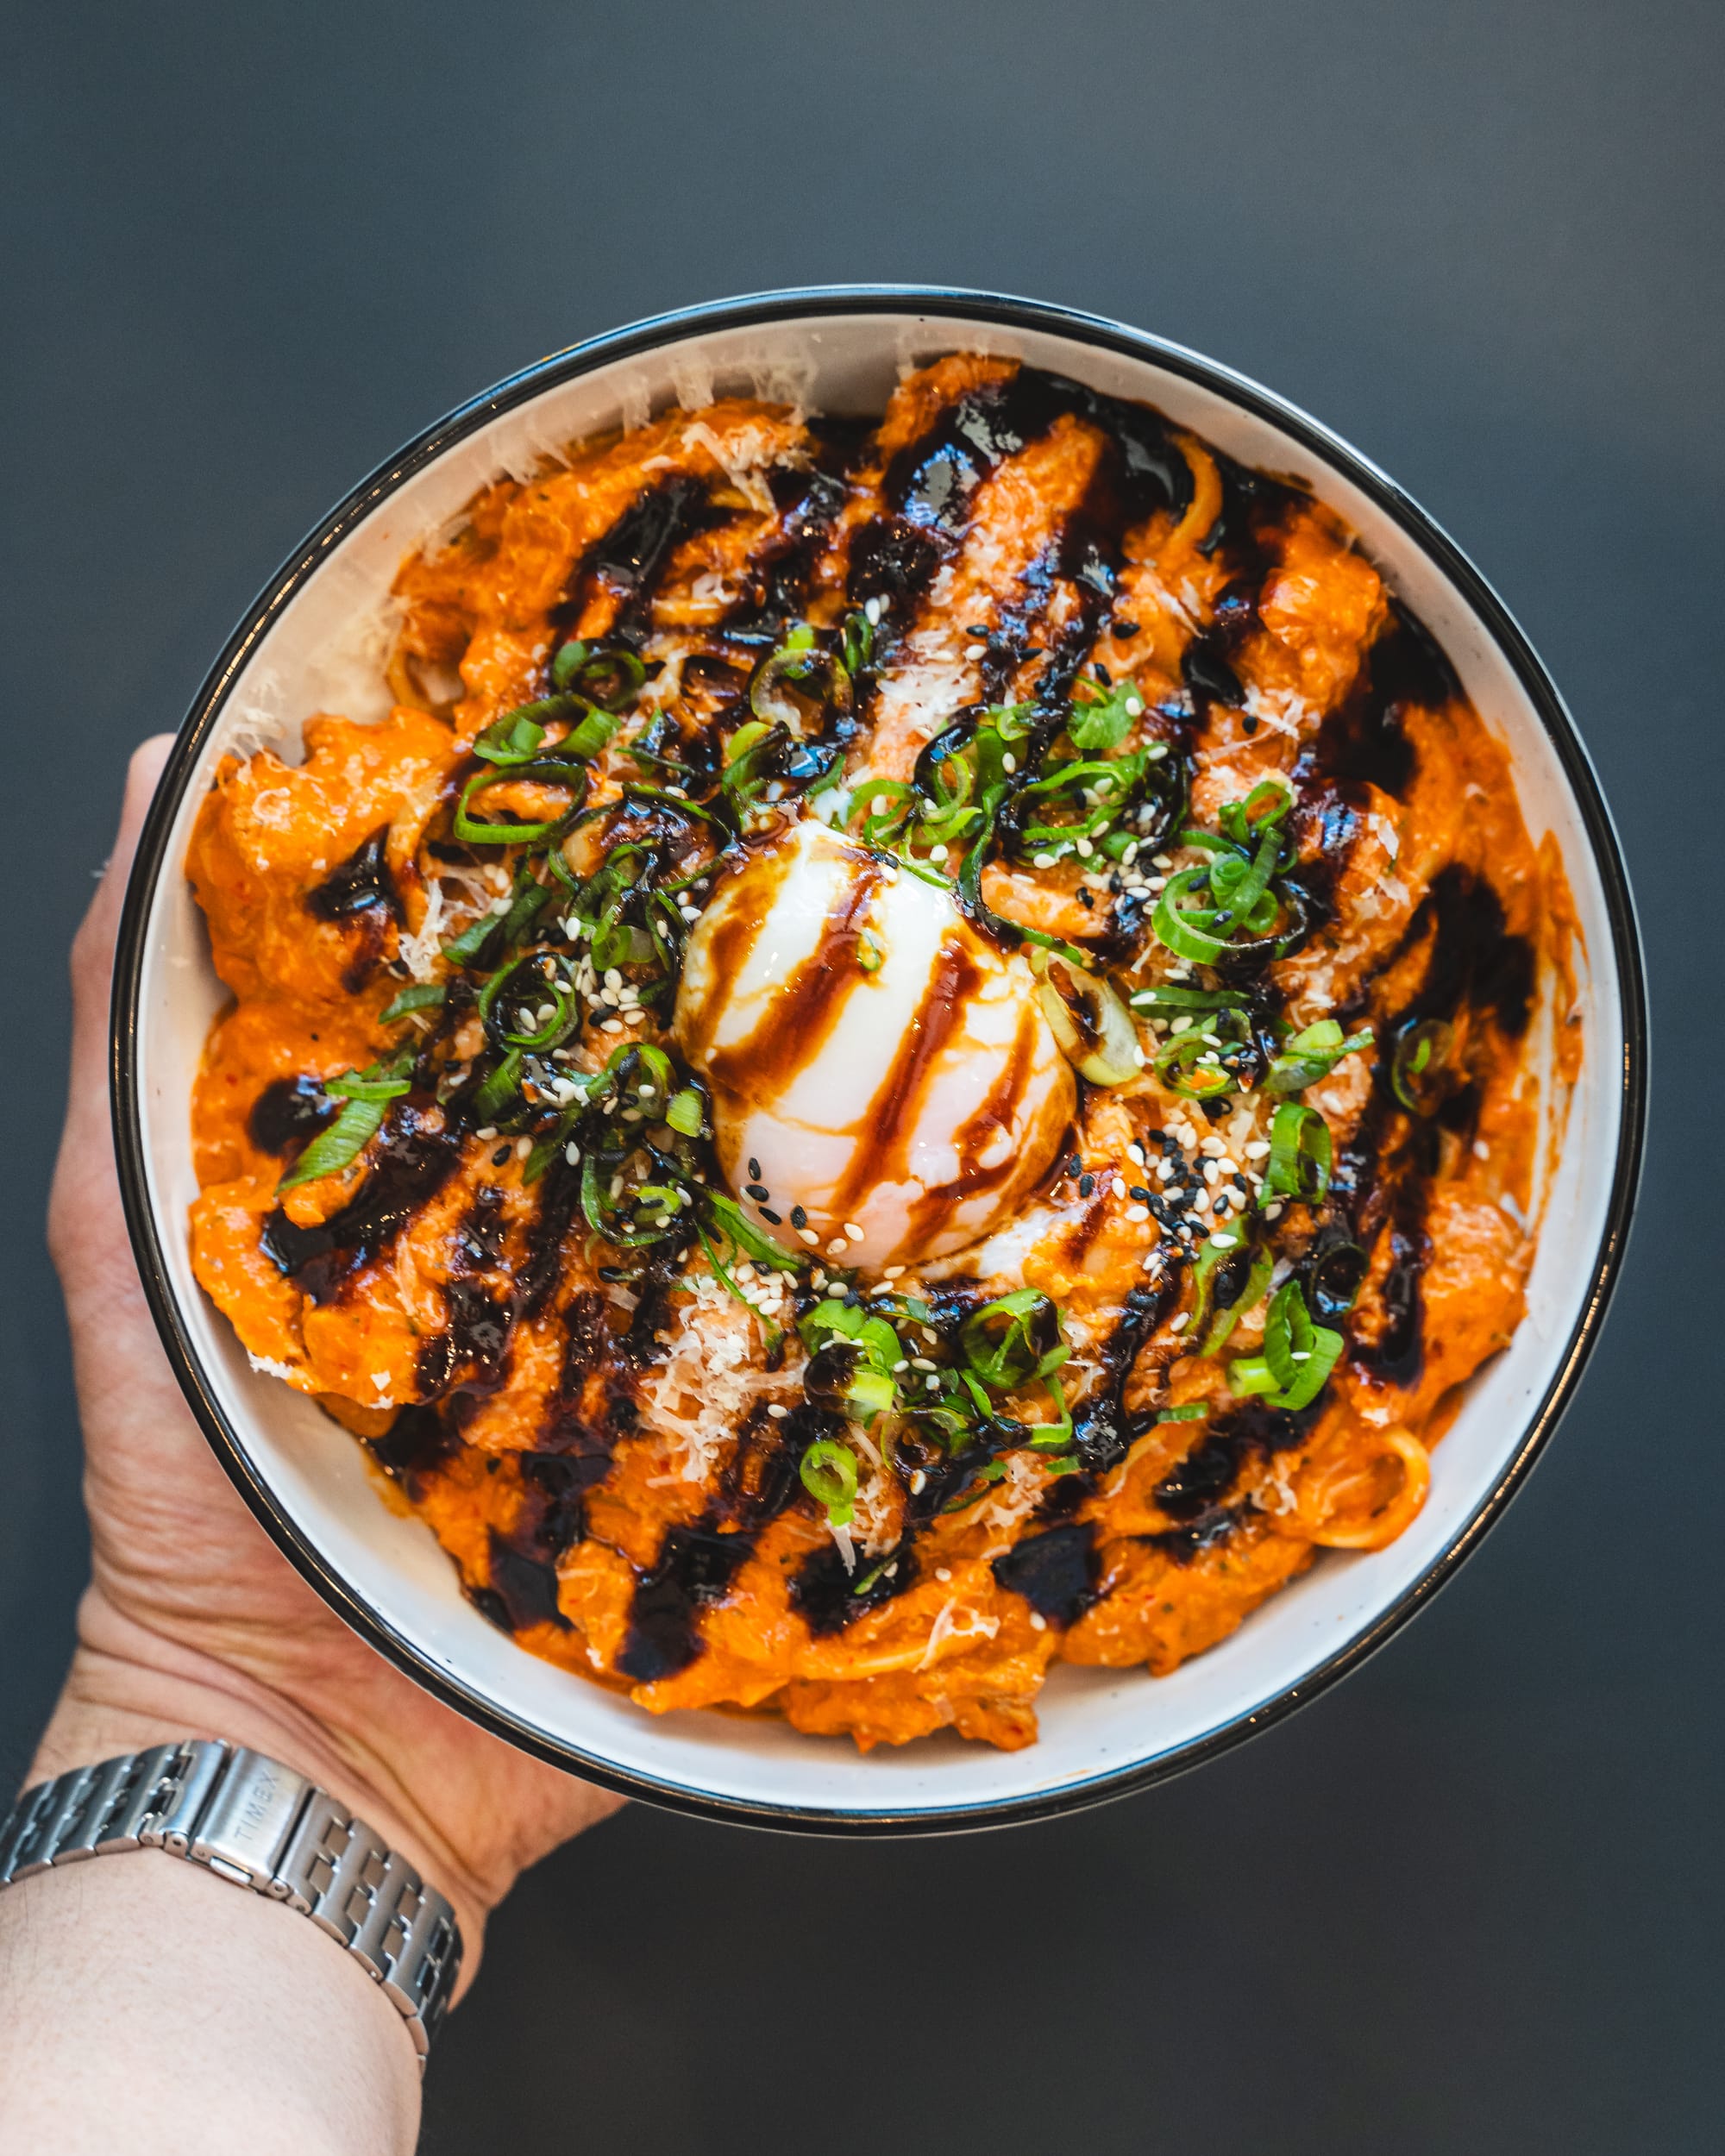 Hand holding a bowl of pasta with a sous vide egg and tonkatsu sauce